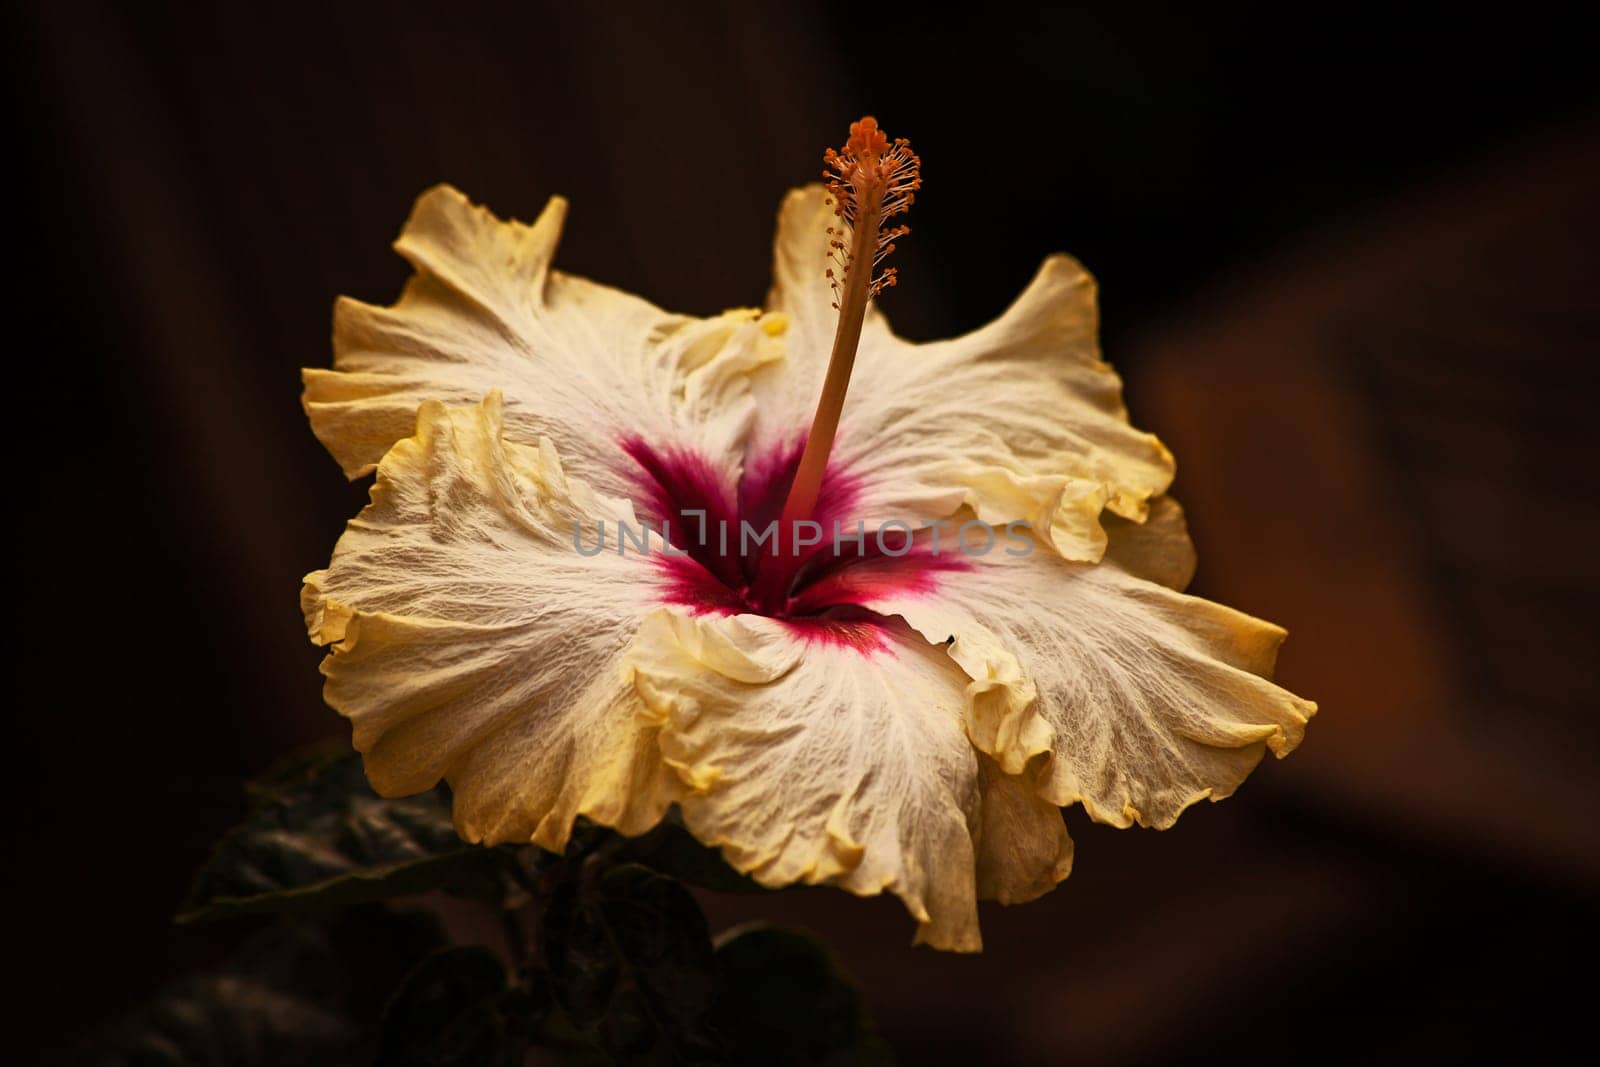 Makro image of a single yellow Hibiscus flower isolated on a dark background